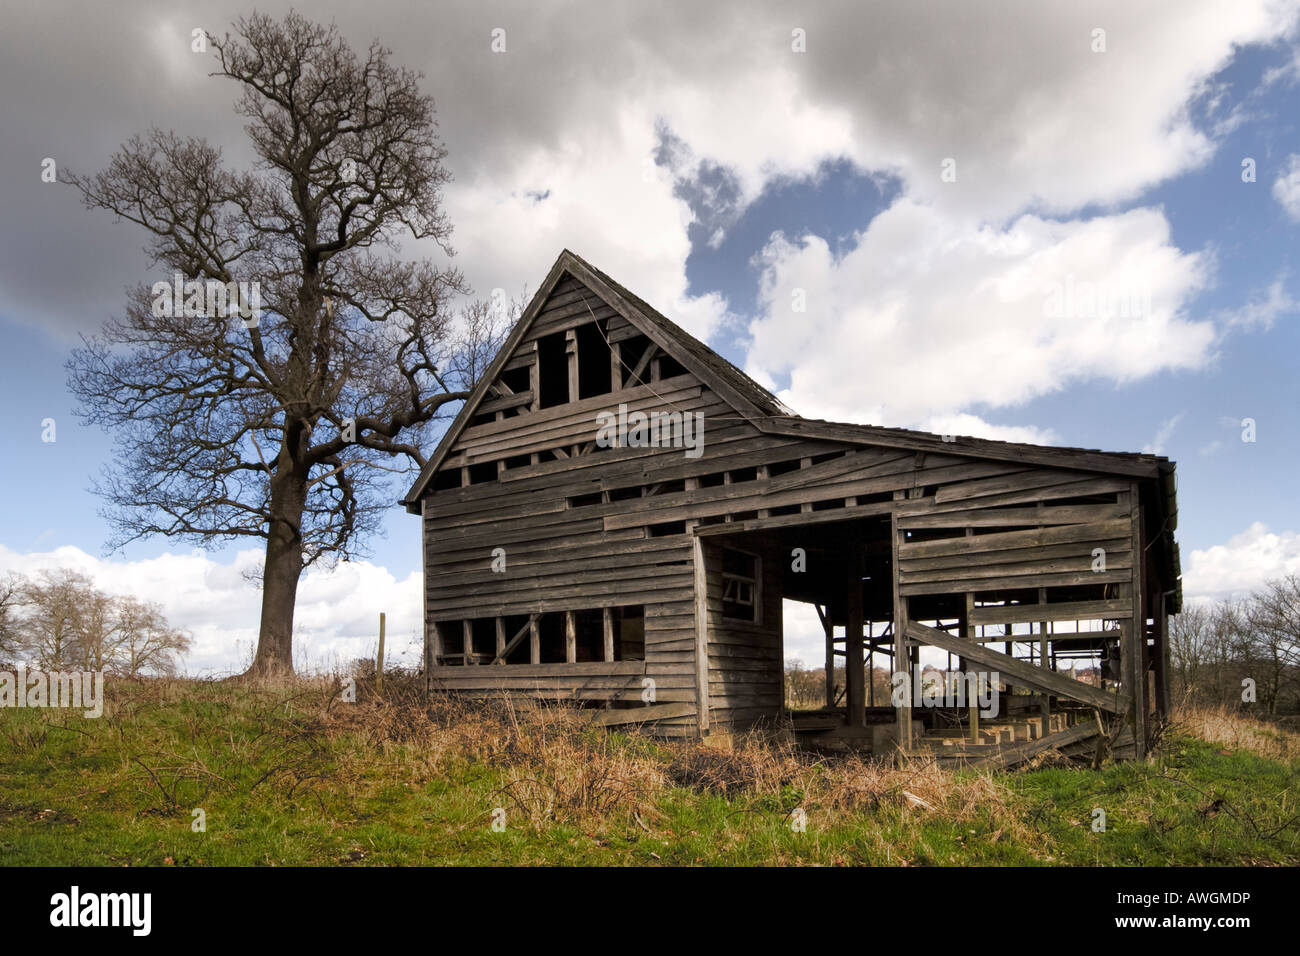 An old wooden barn on the point of collapse Stock Photo